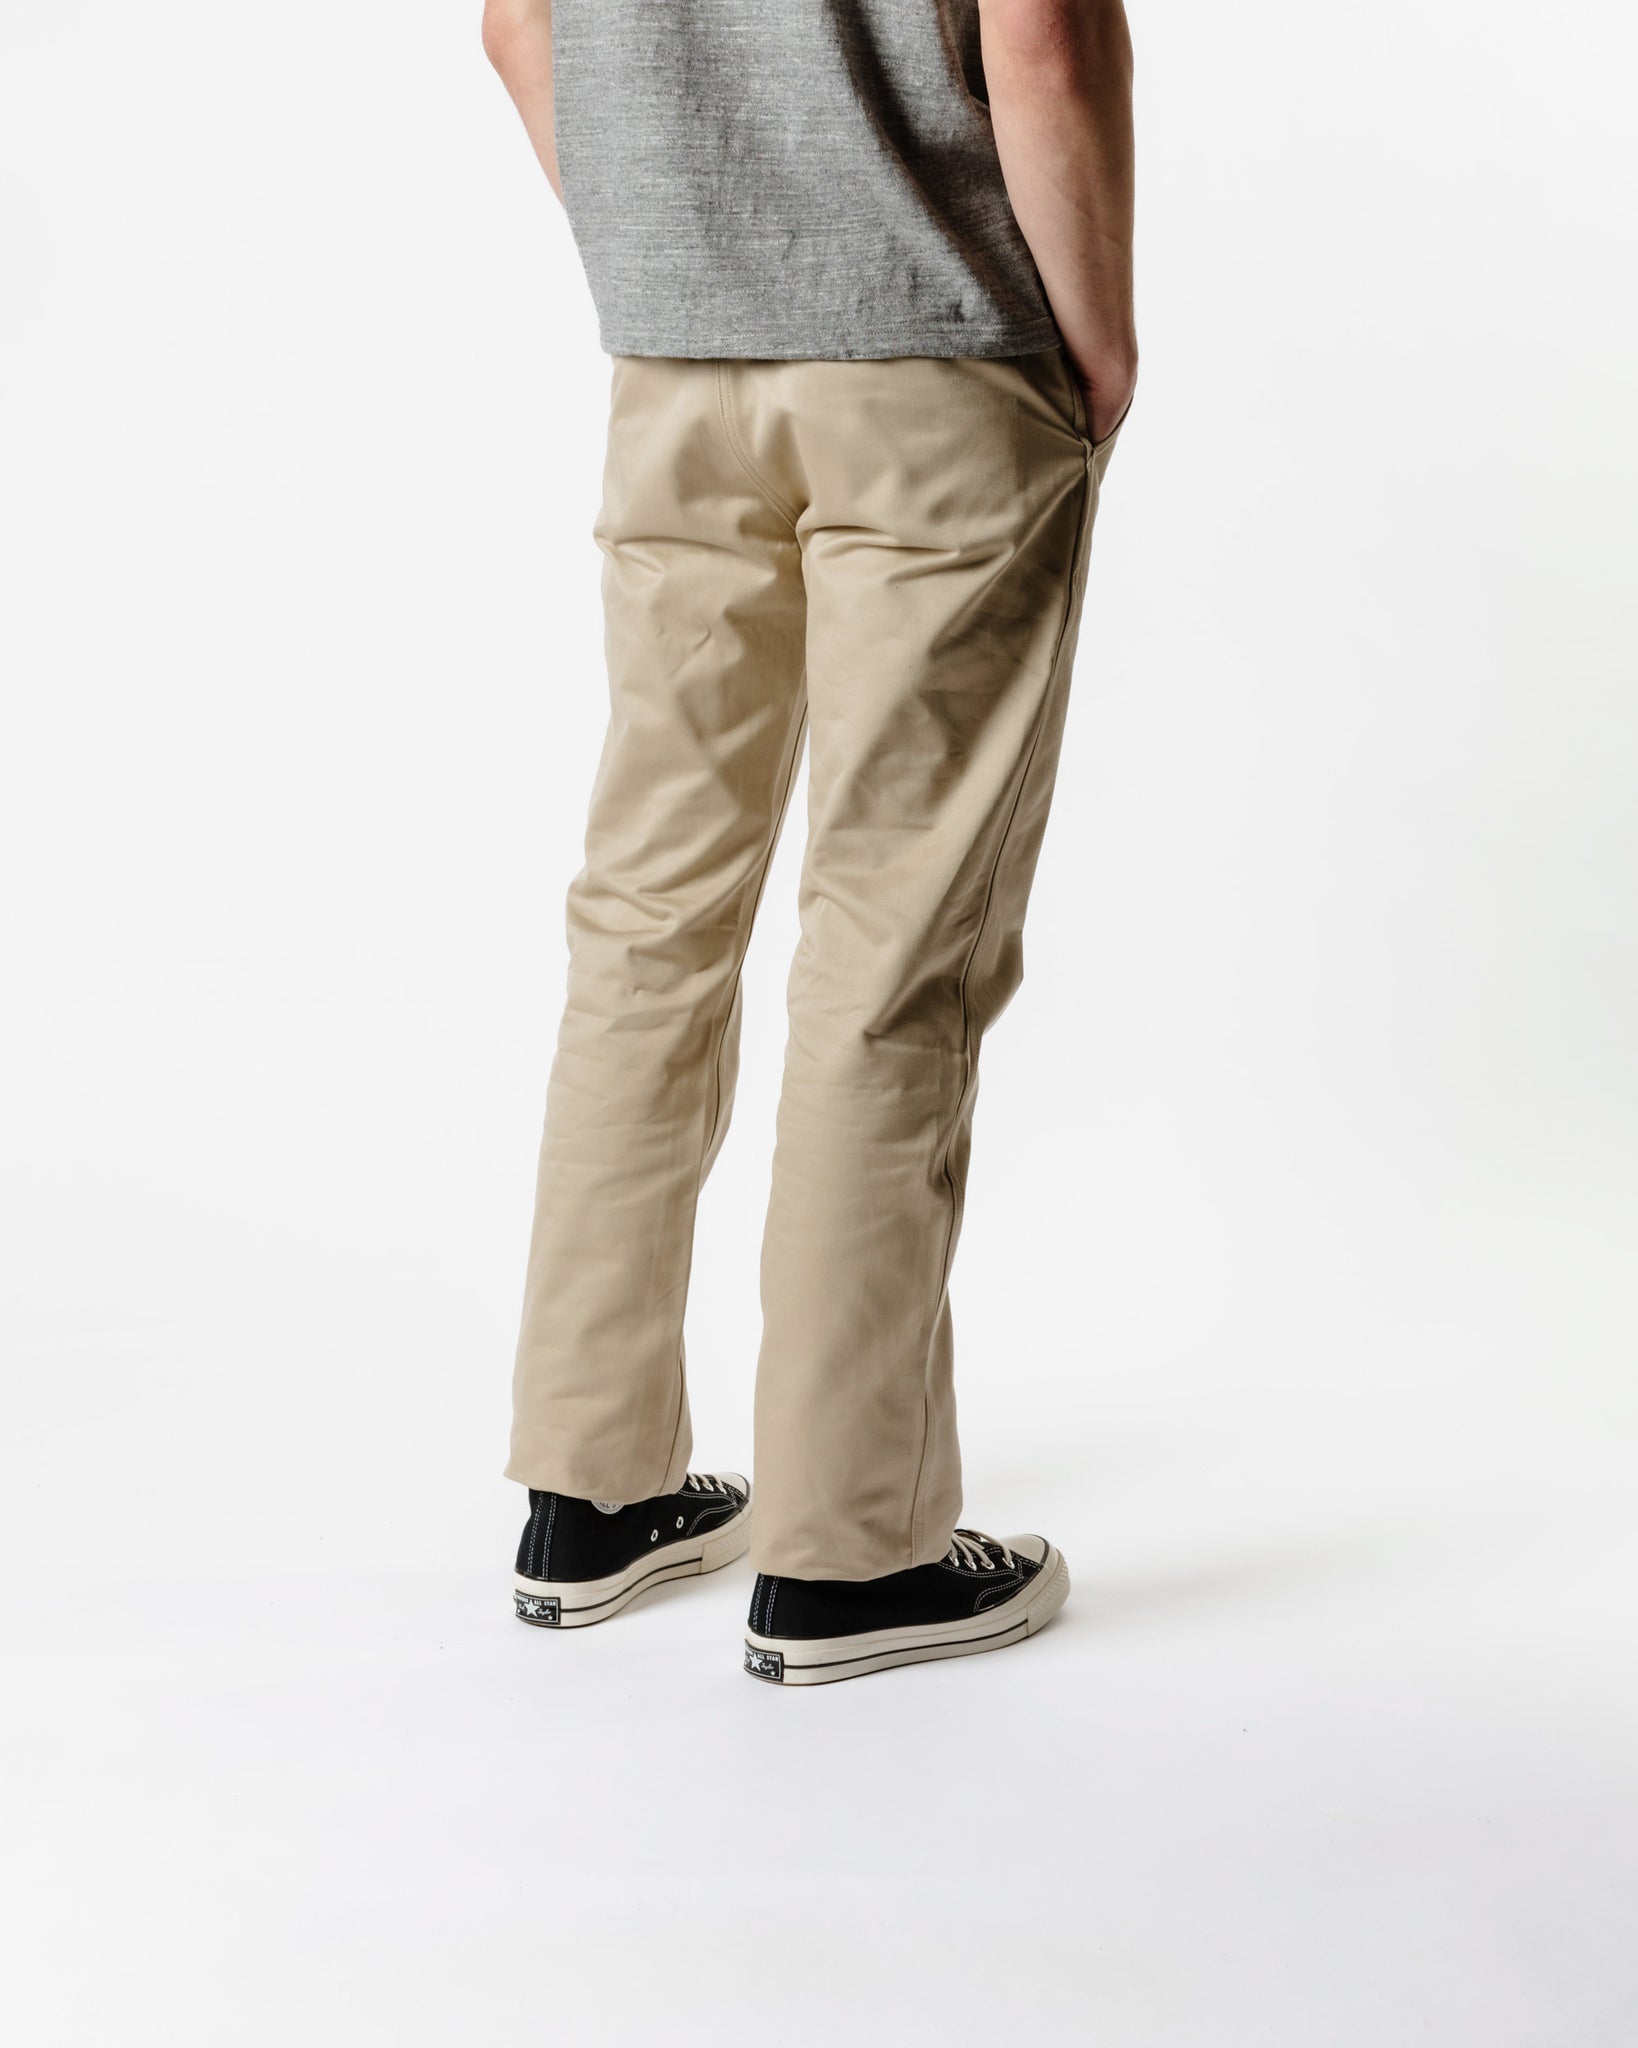 The Real McCoy's MP19010 Blue Seal Chino Trousers Beige Back